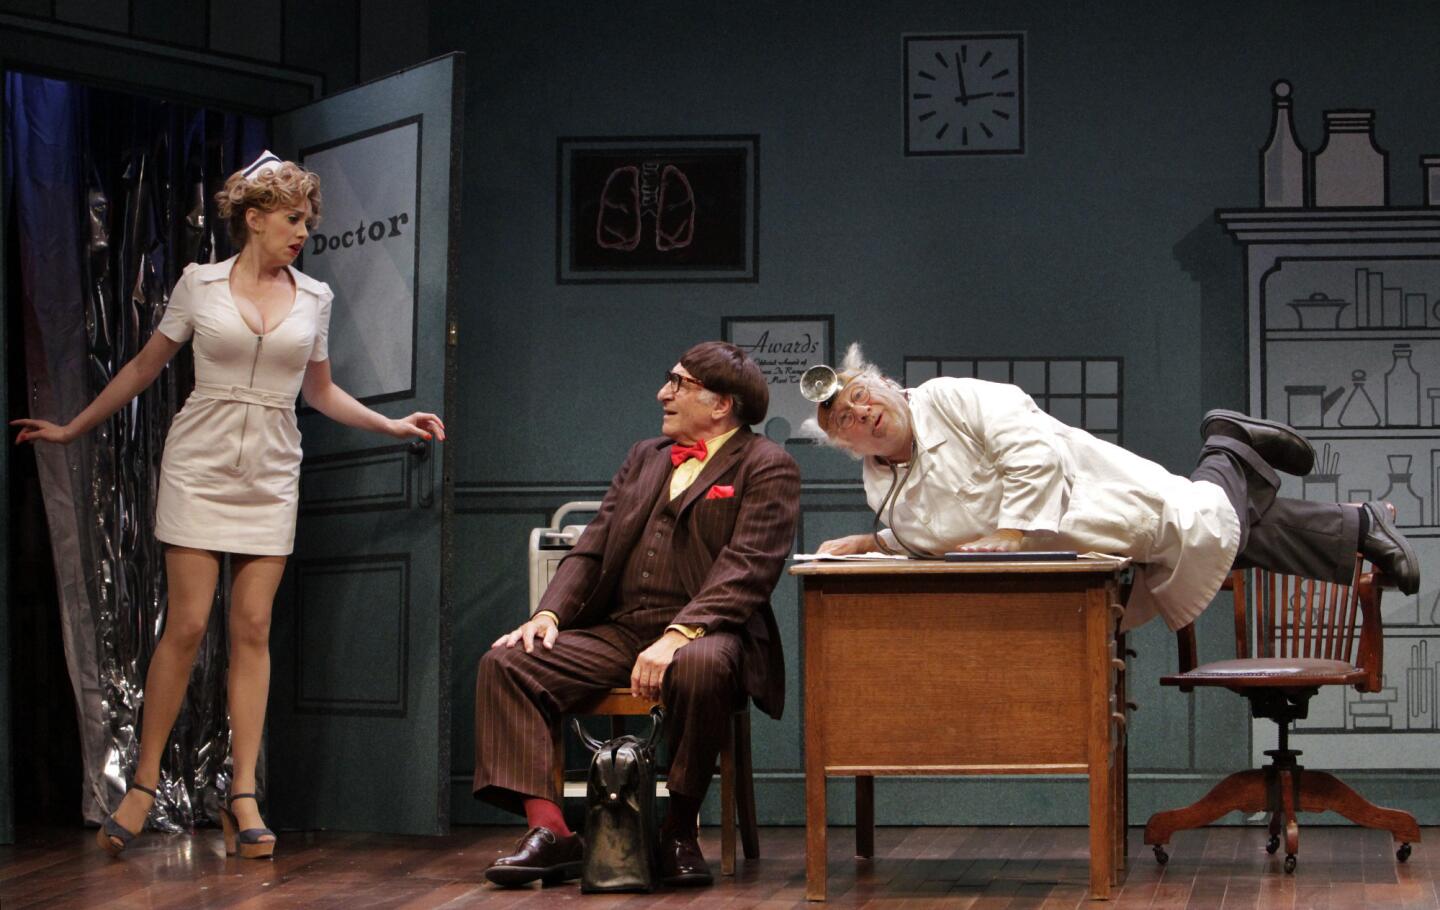 Annie Abrams, Judd Hirsch, center; and Danny DeVito in a scene from the revival of Neil Simon's "The Sunshine Boys" at the Ahmanson Theatre in Los Angeles.